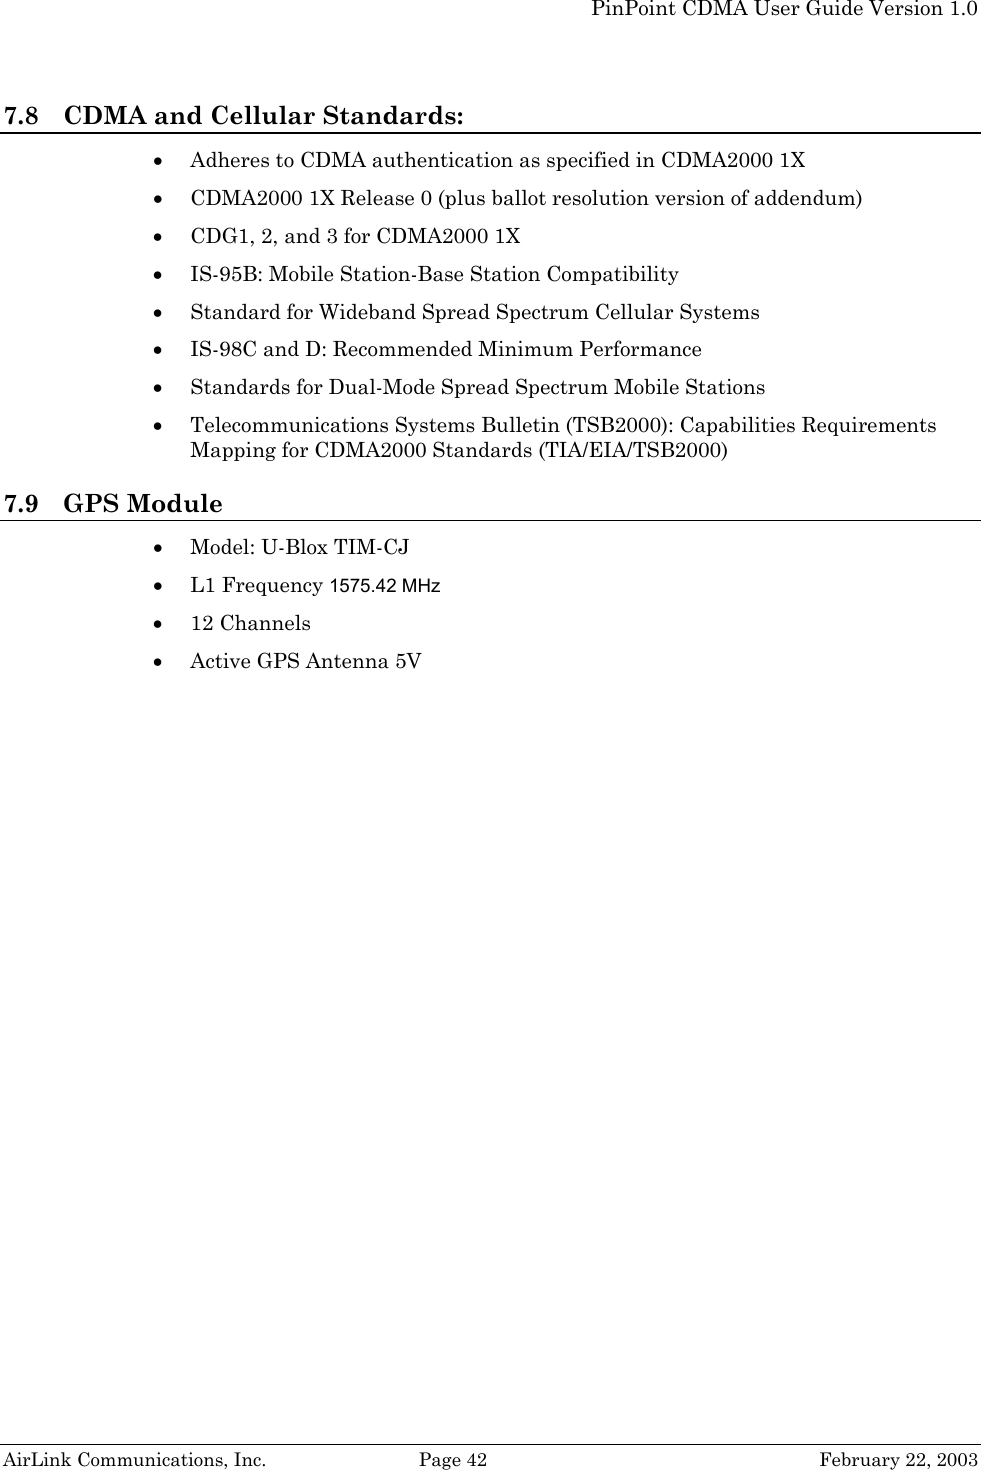   PinPoint CDMA User Guide Version 1.0   AirLink Communications, Inc.  Page 42  February 22, 2003 7.8 CDMA and Cellular Standards: • Adheres to CDMA authentication as specified in CDMA2000 1X • CDMA2000 1X Release 0 (plus ballot resolution version of addendum) • CDG1, 2, and 3 for CDMA2000 1X • IS-95B: Mobile Station-Base Station Compatibility • Standard for Wideband Spread Spectrum Cellular Systems • IS-98C and D: Recommended Minimum Performance • Standards for Dual-Mode Spread Spectrum Mobile Stations • Telecommunications Systems Bulletin (TSB2000): Capabilities Requirements Mapping for CDMA2000 Standards (TIA/EIA/TSB2000) 7.9 GPS Module • Model: U-Blox TIM-CJ • L1 Frequency 1575.42 MHz • 12 Channels • Active GPS Antenna 5V  